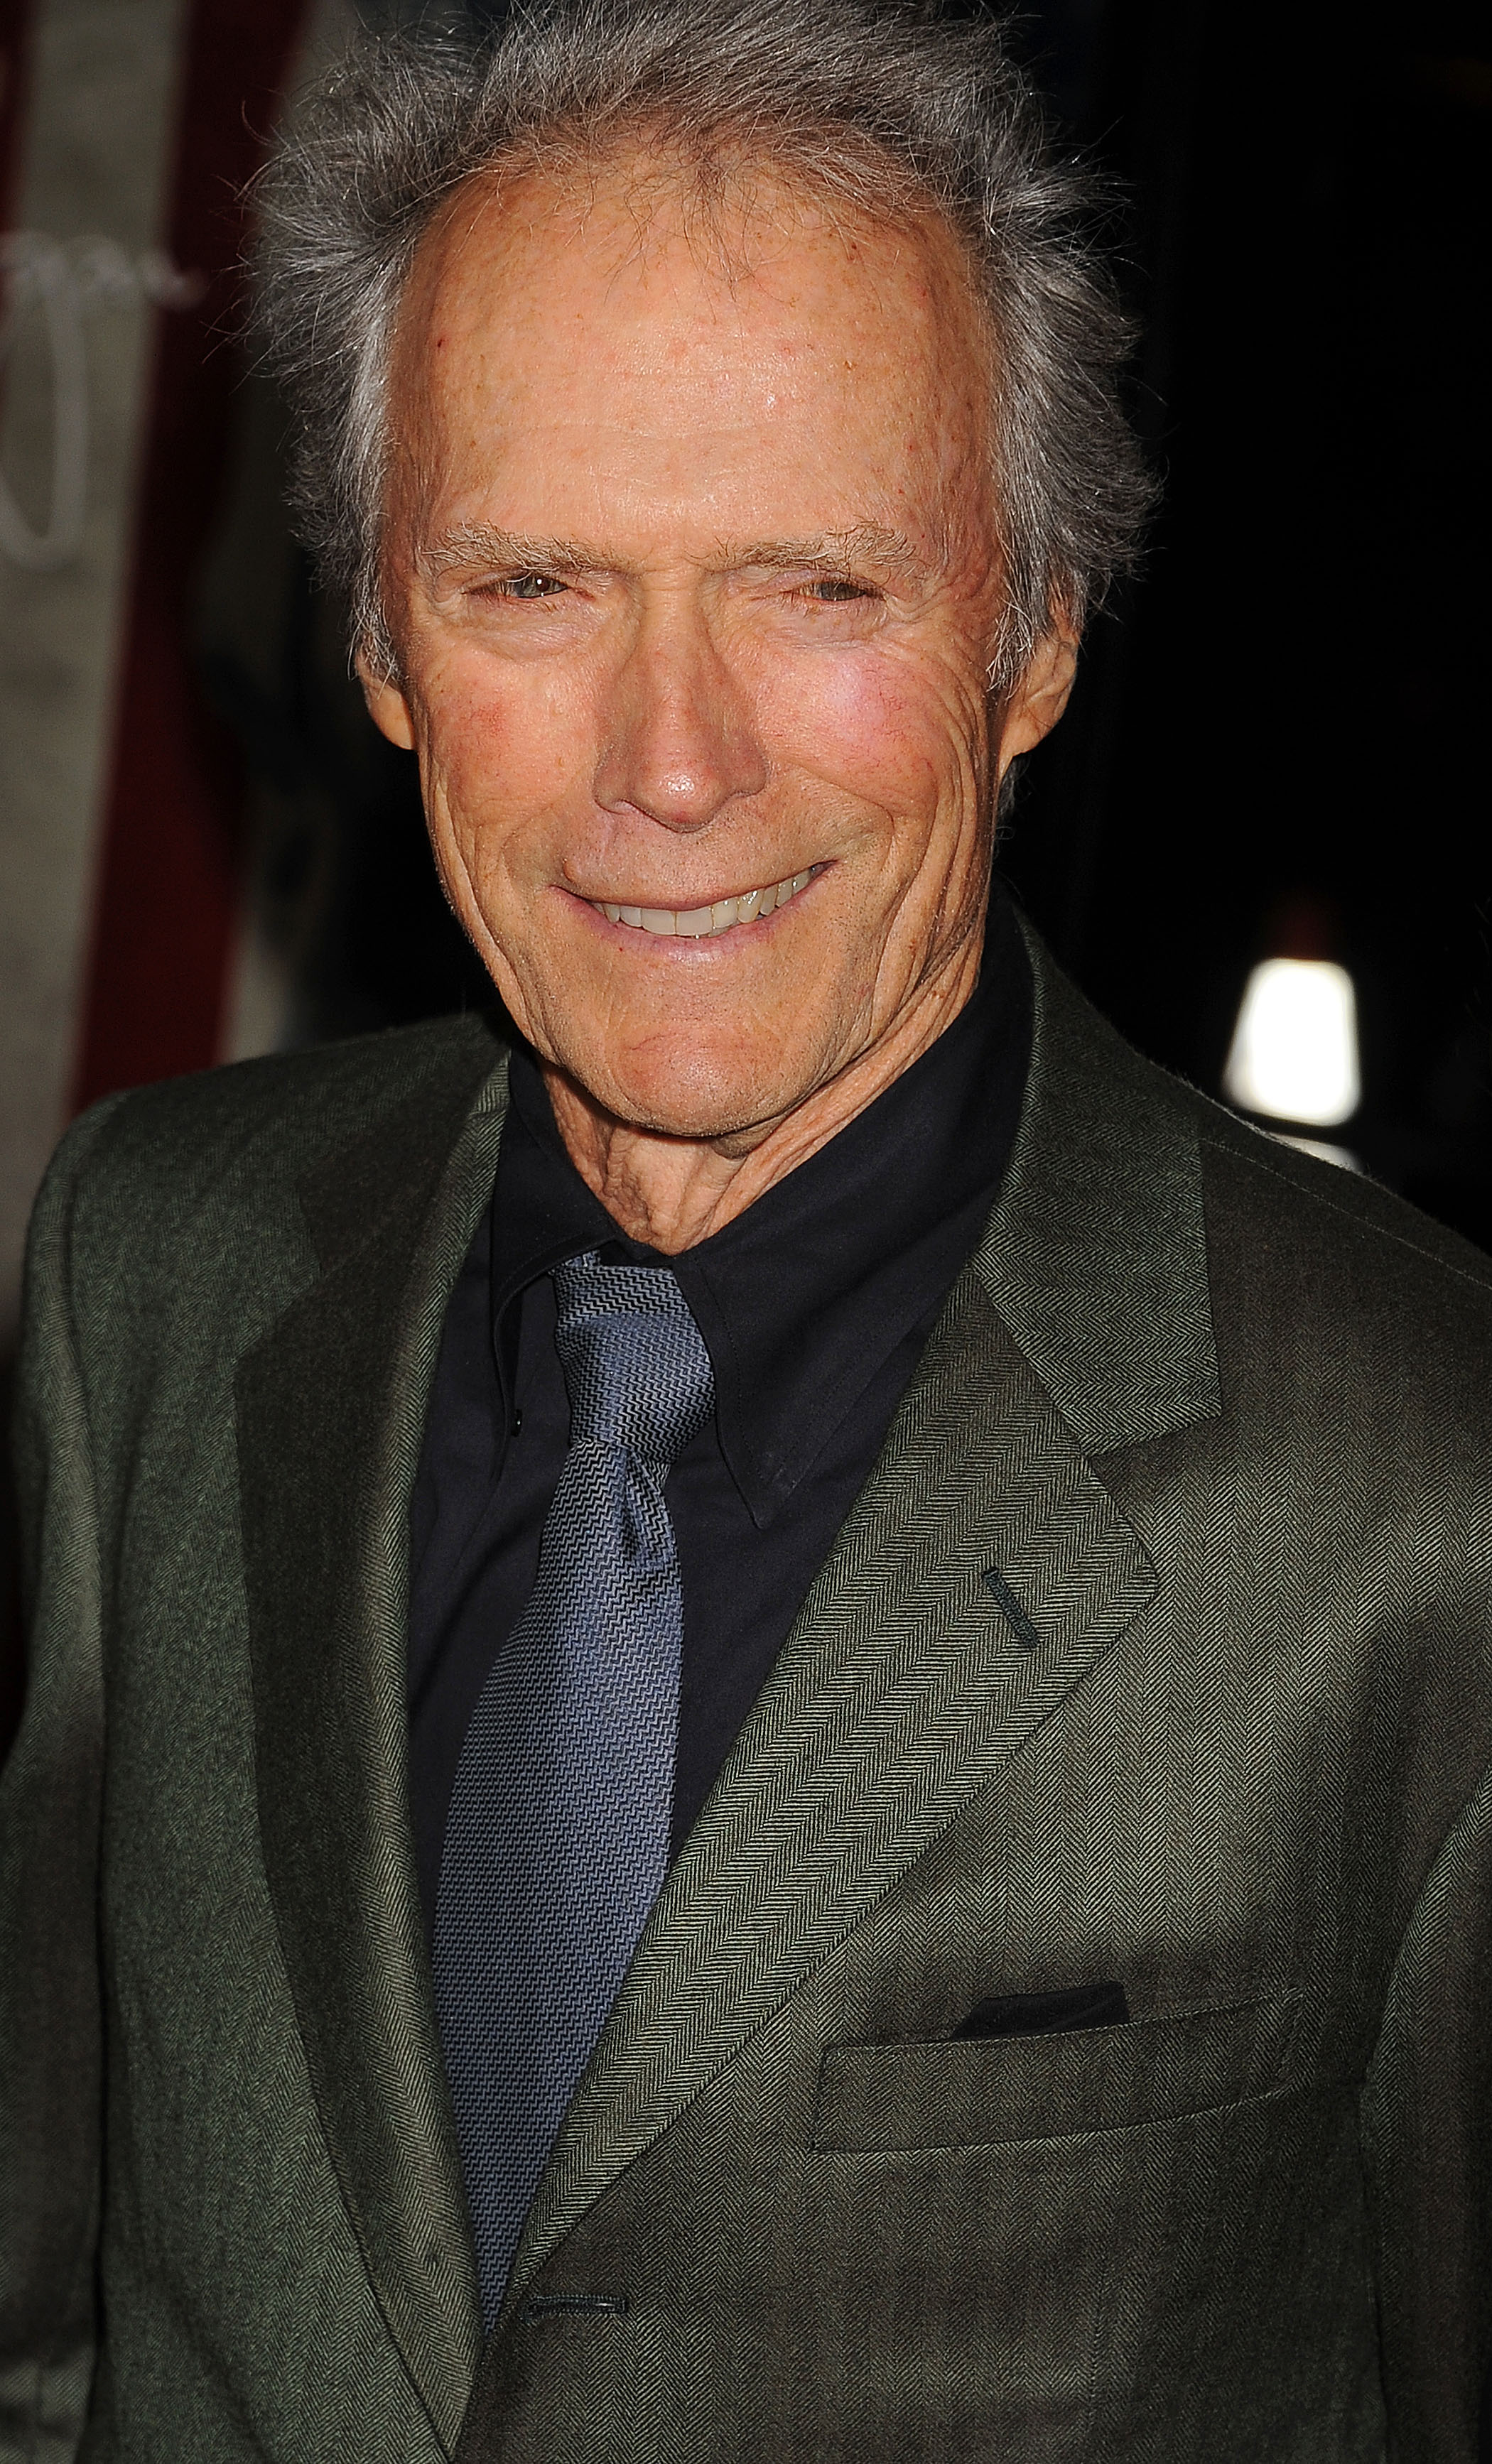 Clint Eastwood at the world premiere of "J. Edgar" in Hollywood, California on November 3, 2011 | Source: Getty Images